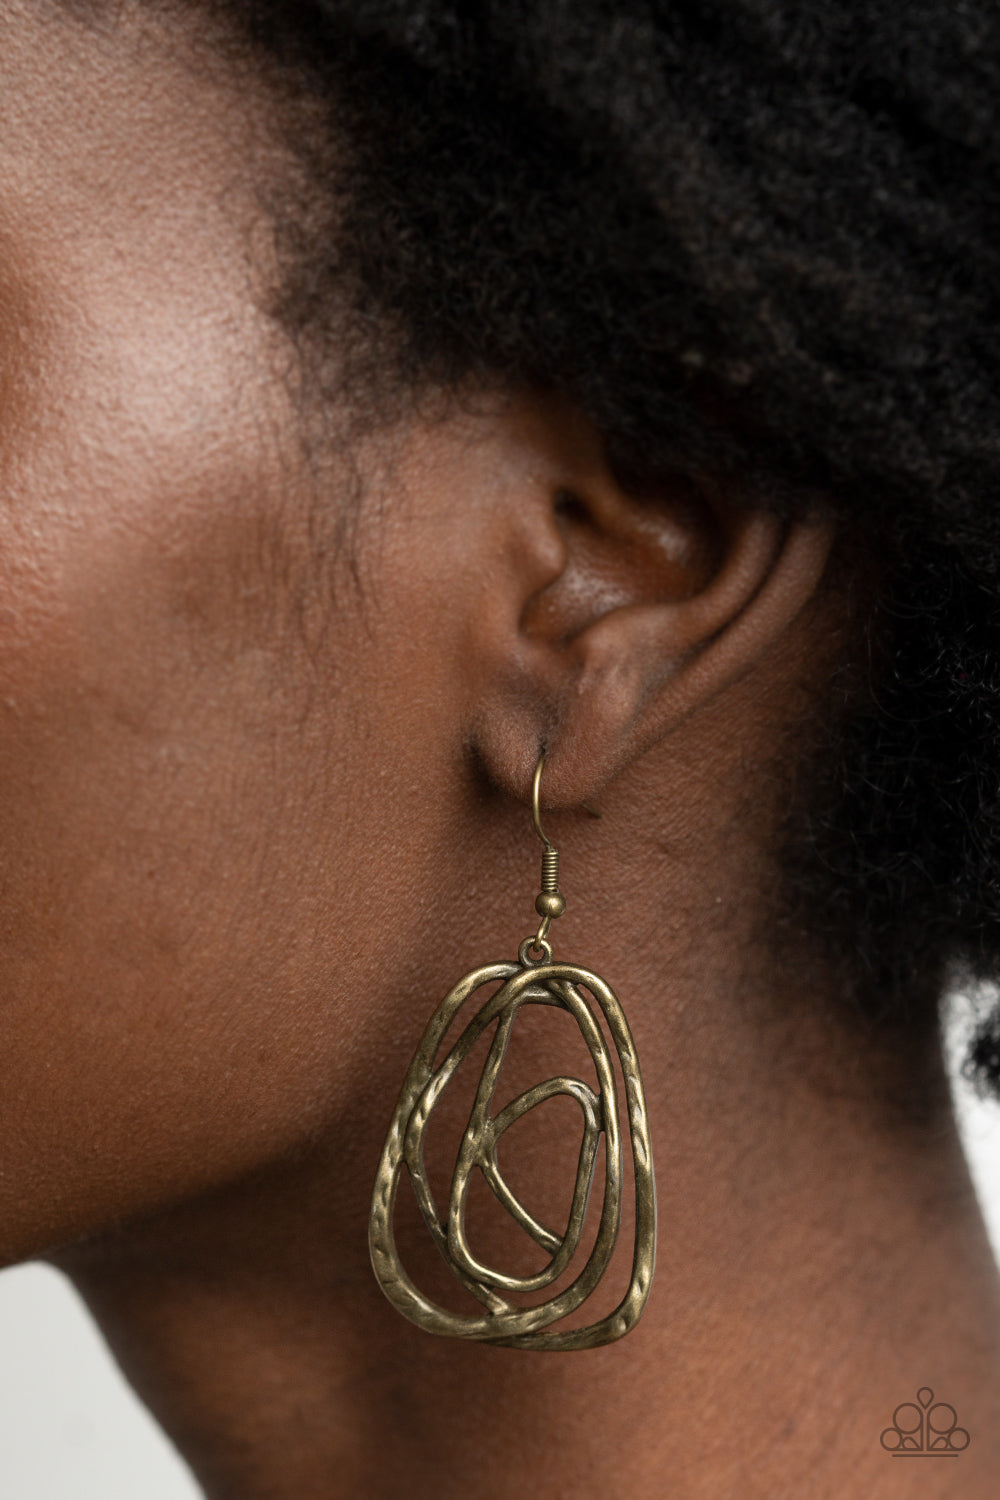 &lt;p&gt;Featuring a hammered finish, a rustic brass wire delicately wraps into an asymmetrical frame for a dizzying artisan inspired look. Earring attaches to a standard fishhook fitting. &lt;/p&gt;  

&lt;p&gt; &lt;i&gt;  Sold as one pair of earrings. &lt;/i&gt;  &lt;/p&gt;


